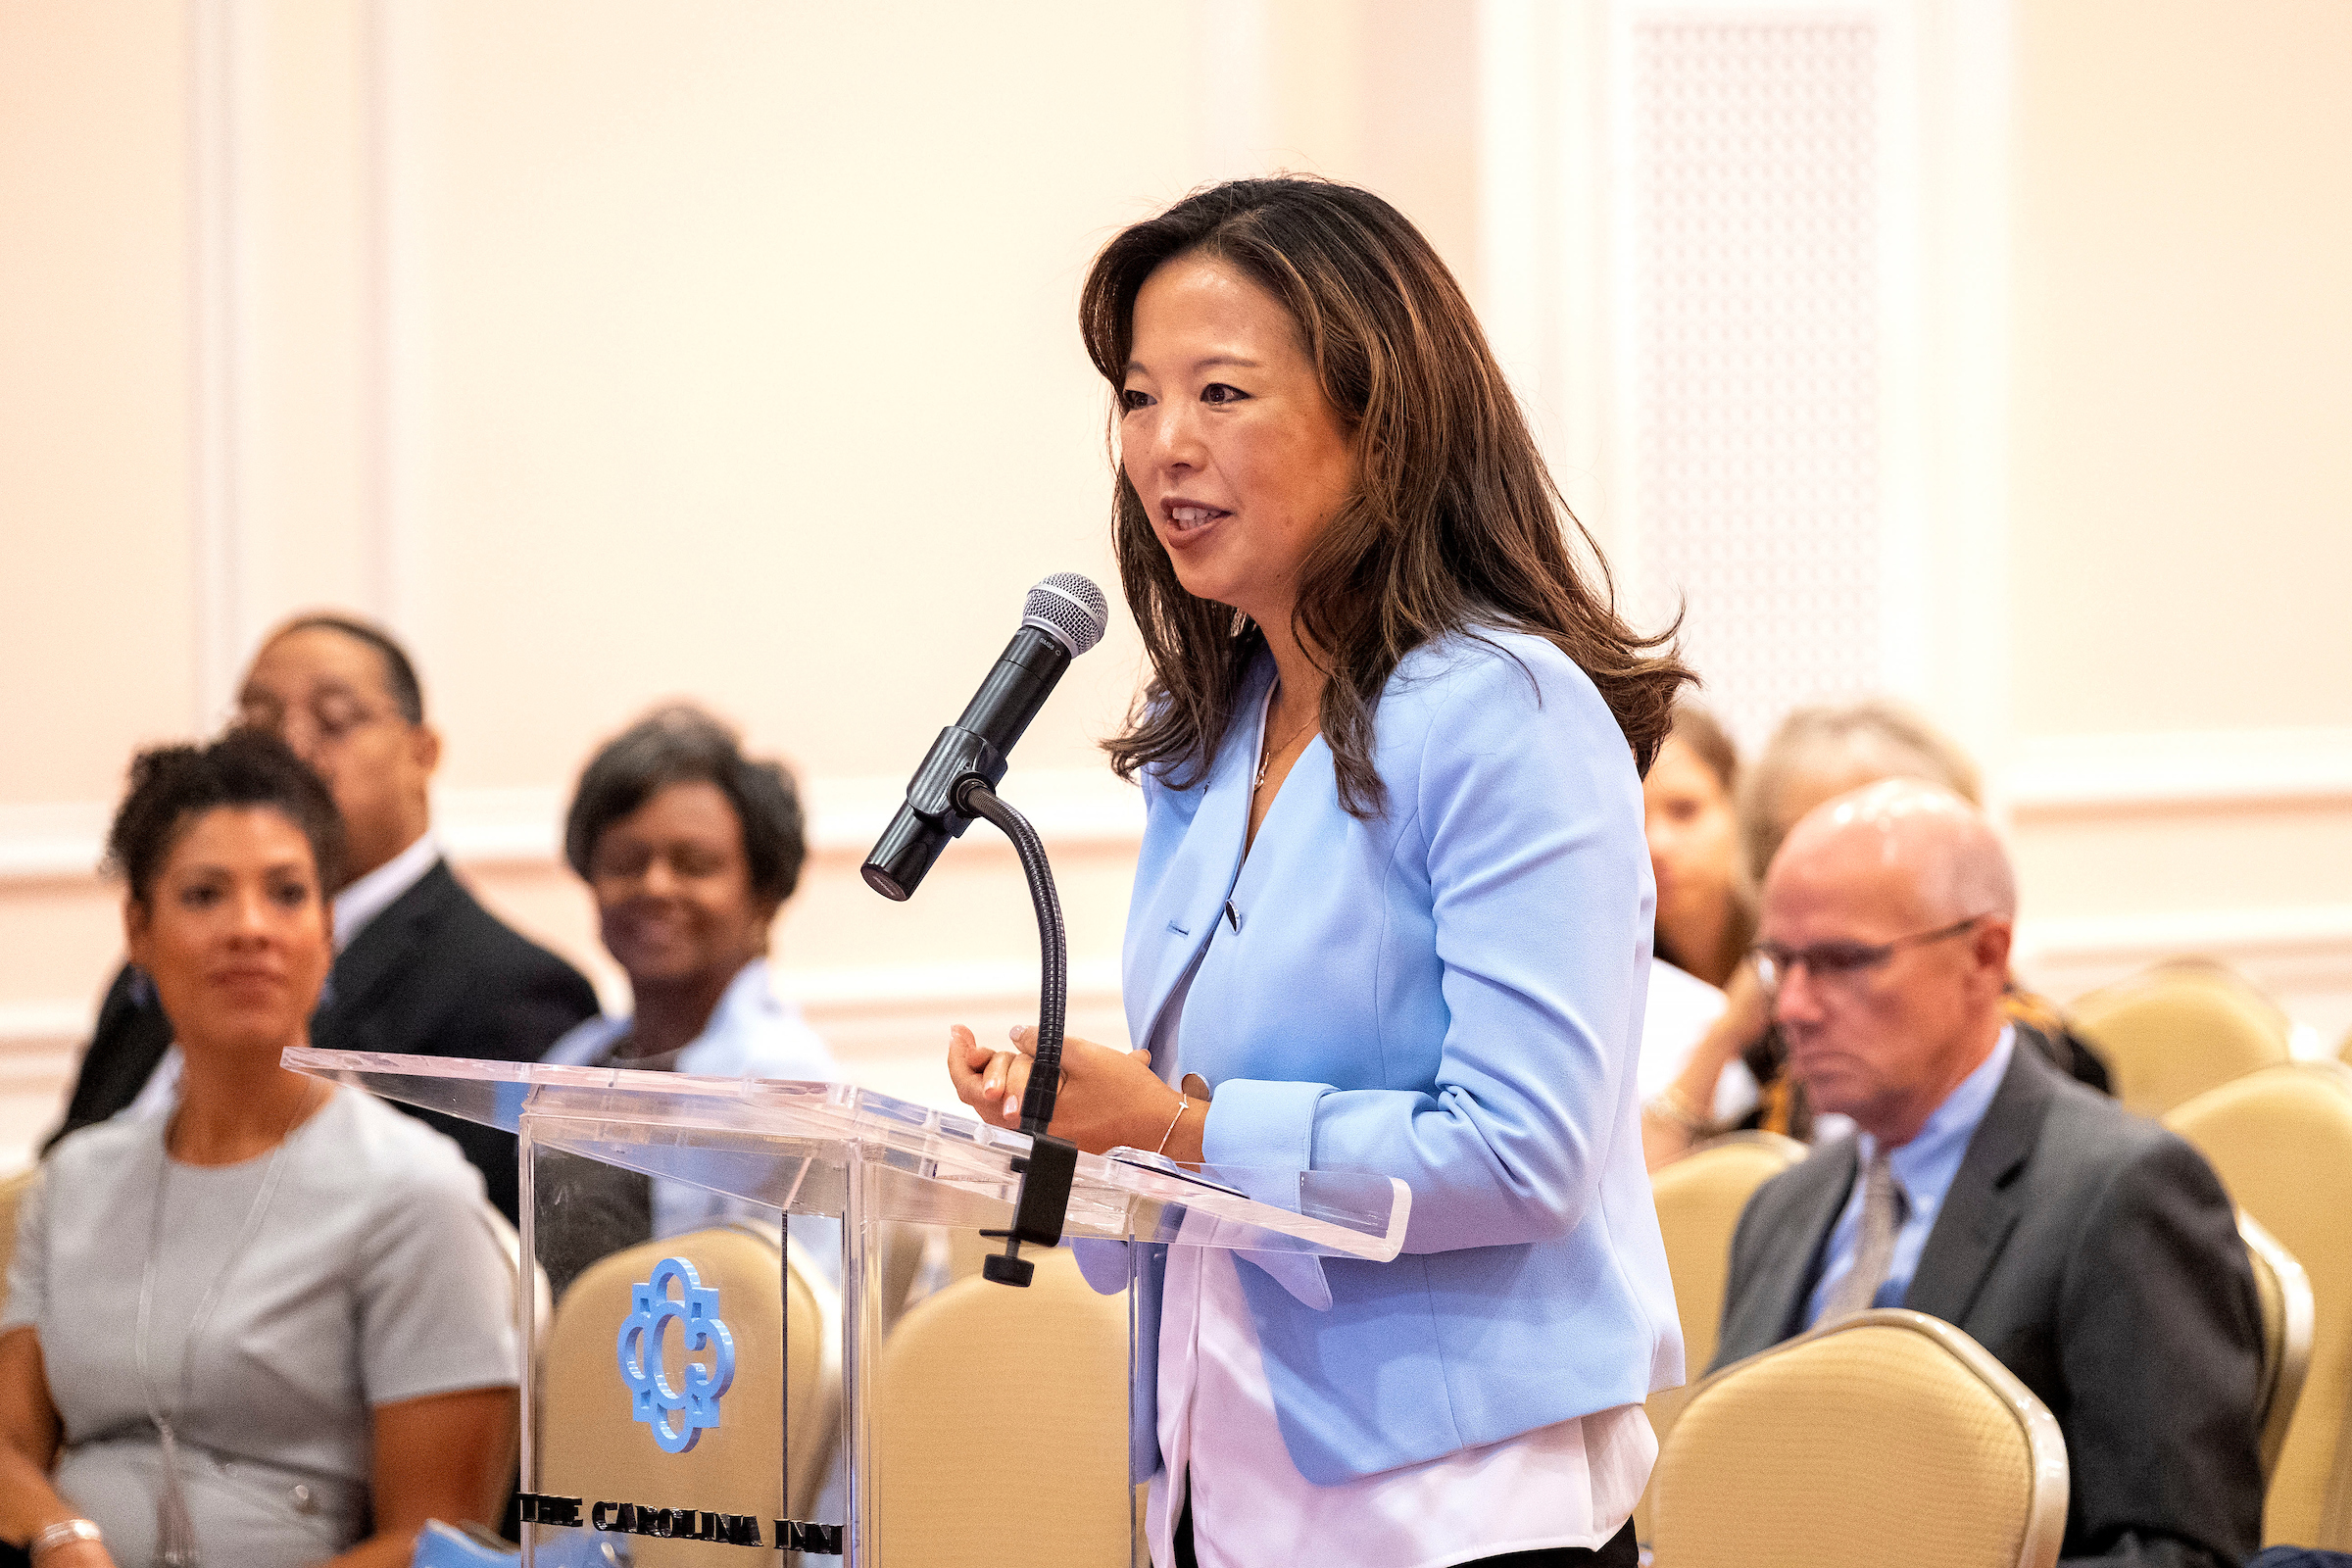 Jessica Lee speaks at a podium at a meeting